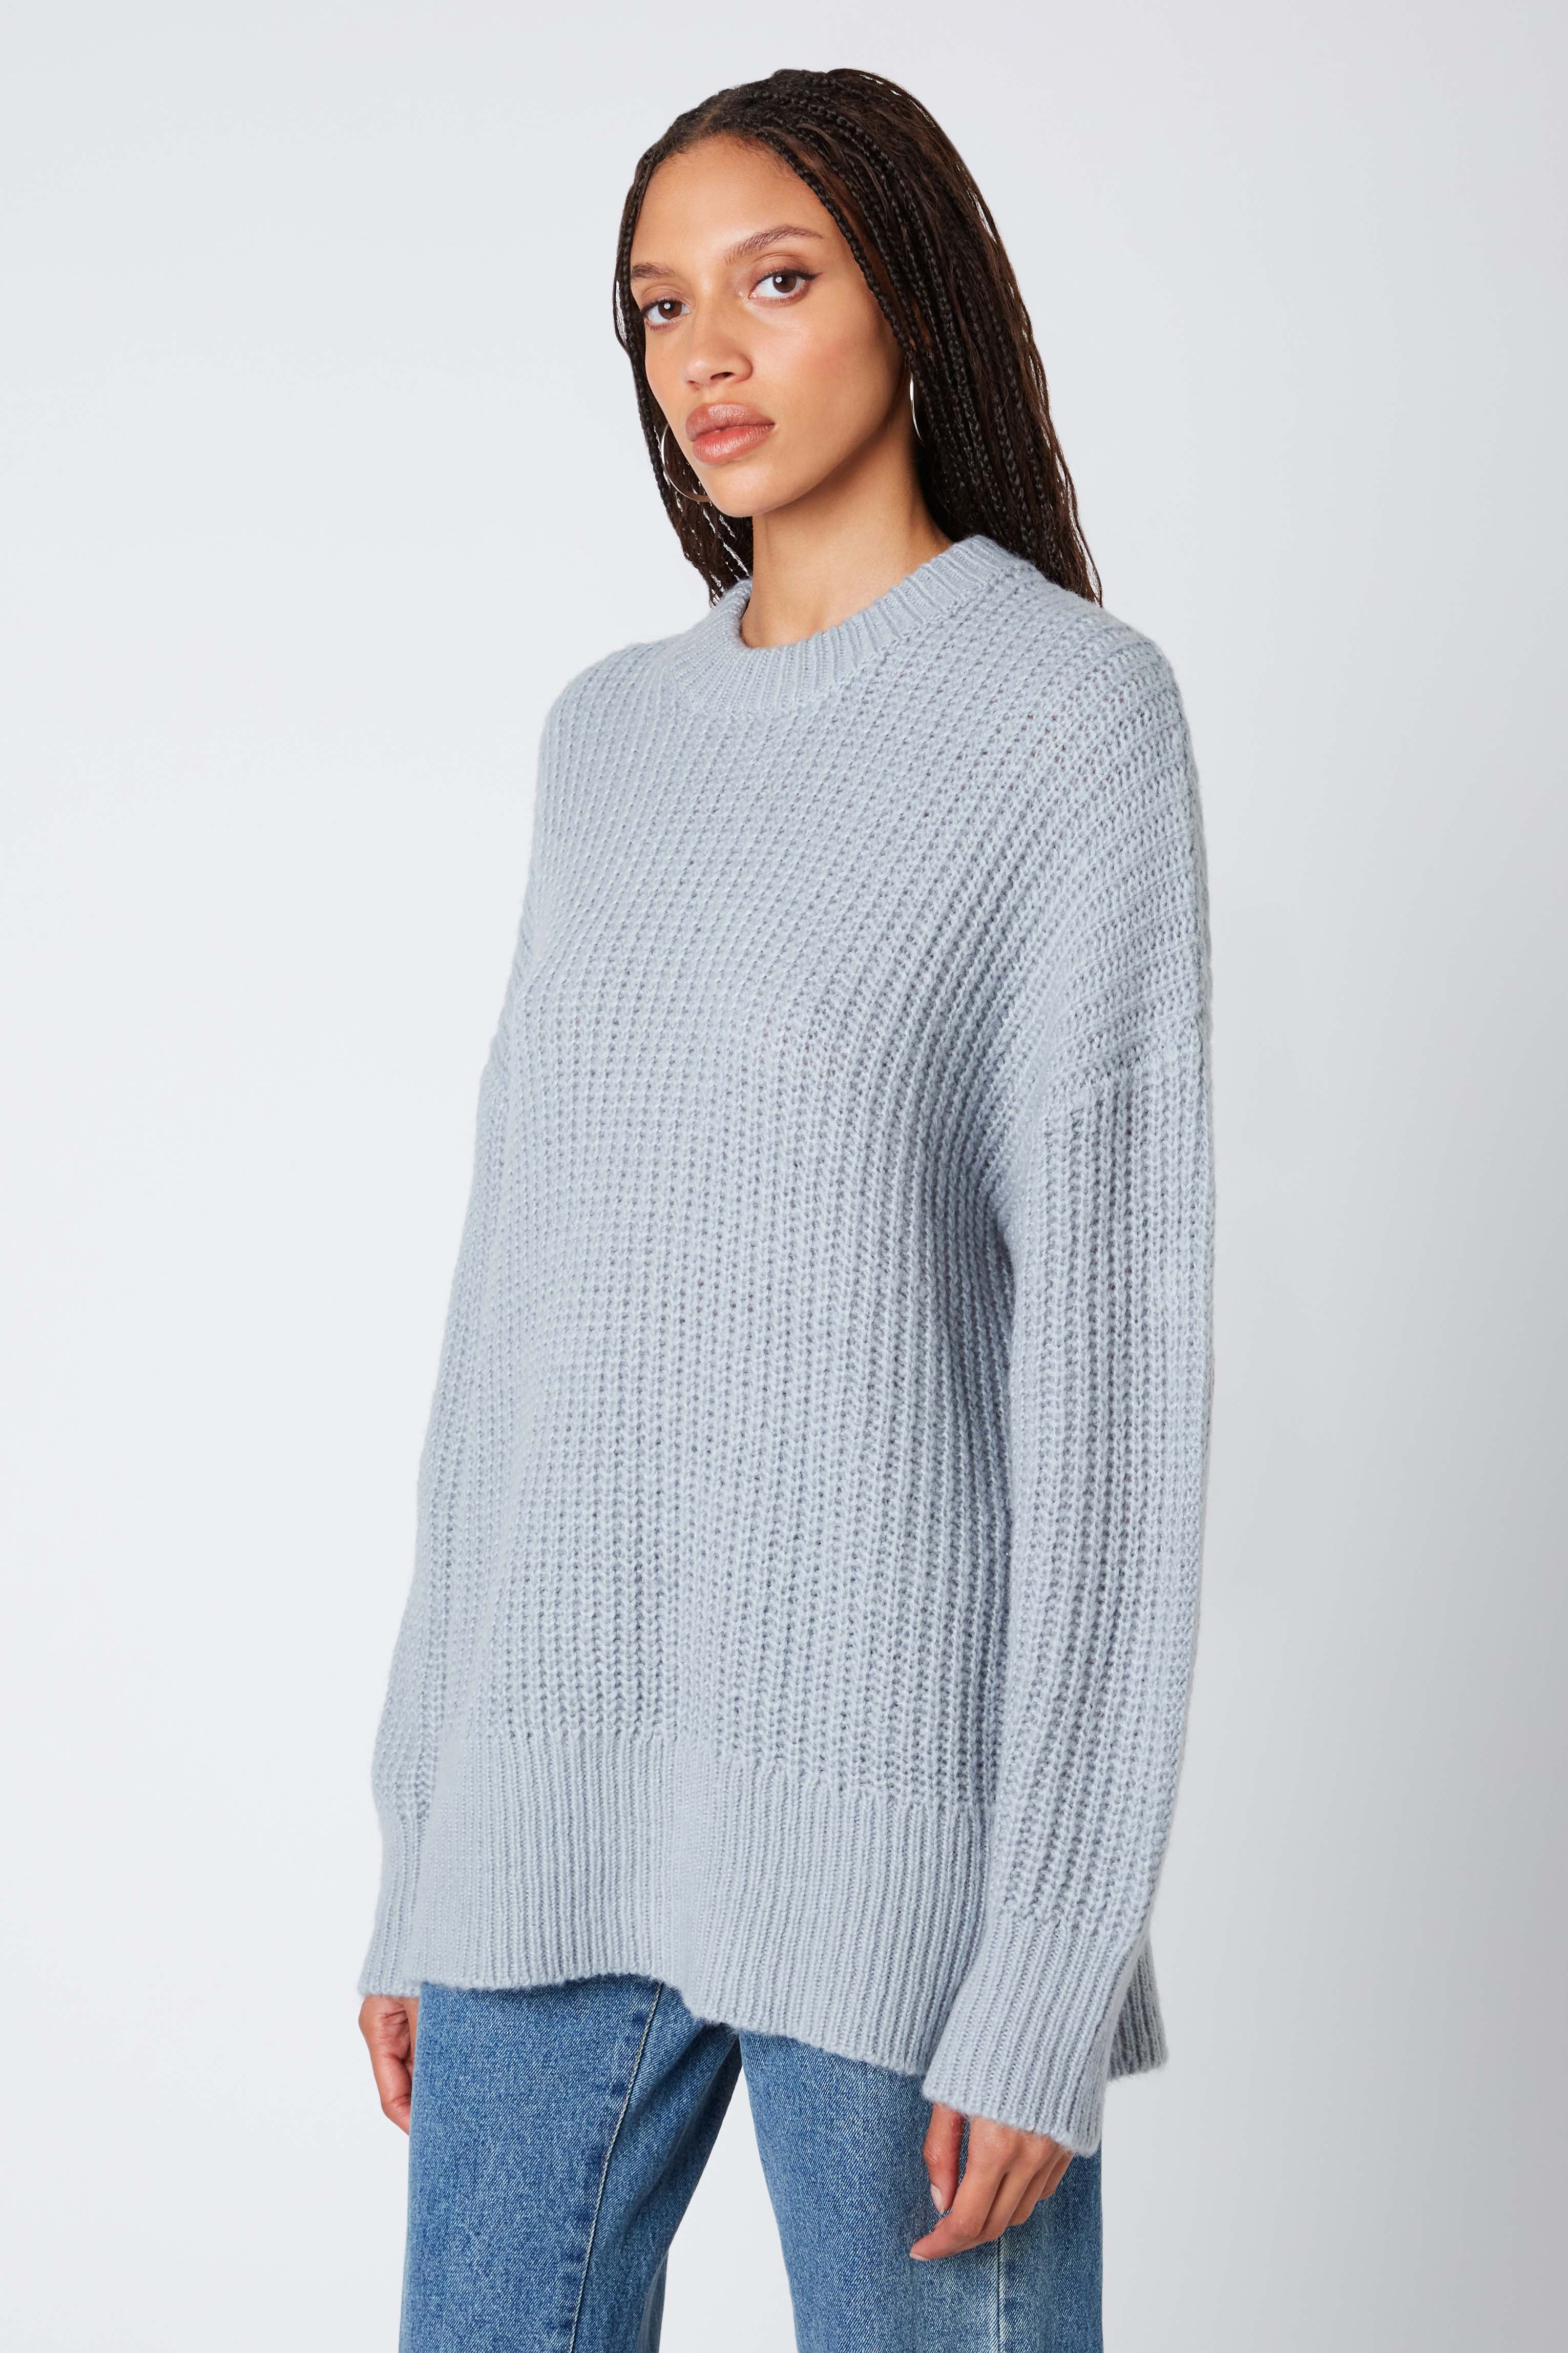 Oversized Knitted Sweater in Slate Side View